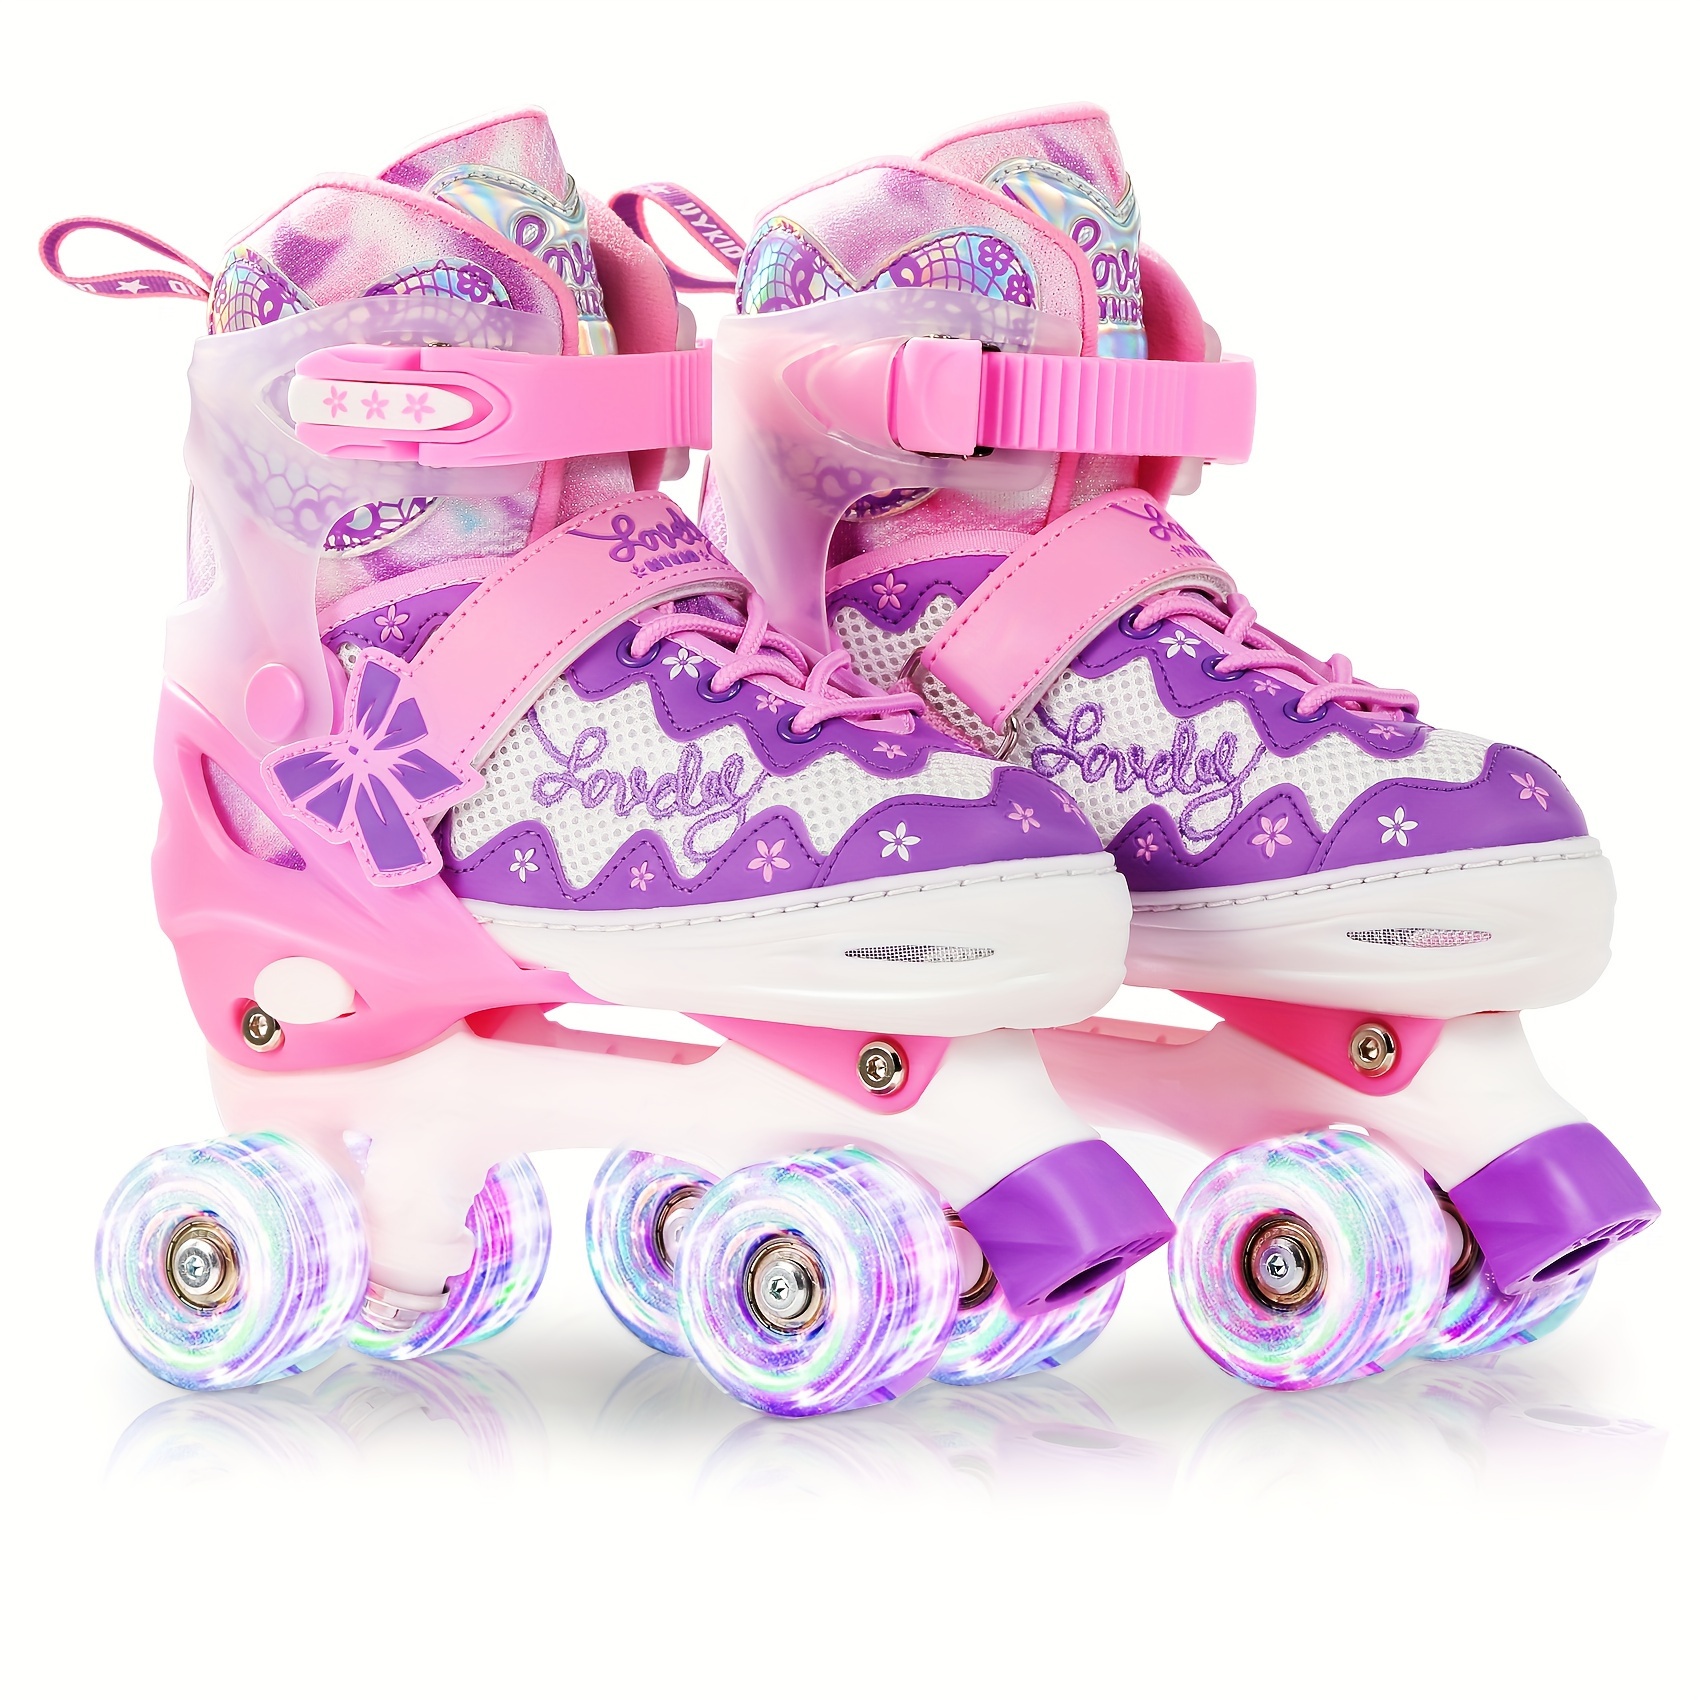 

4 Size Adjustable Roller Skates With Luminous Light Up Wheels, Safe For Girls Boys Kids Toddler, Trimmable Insole Included